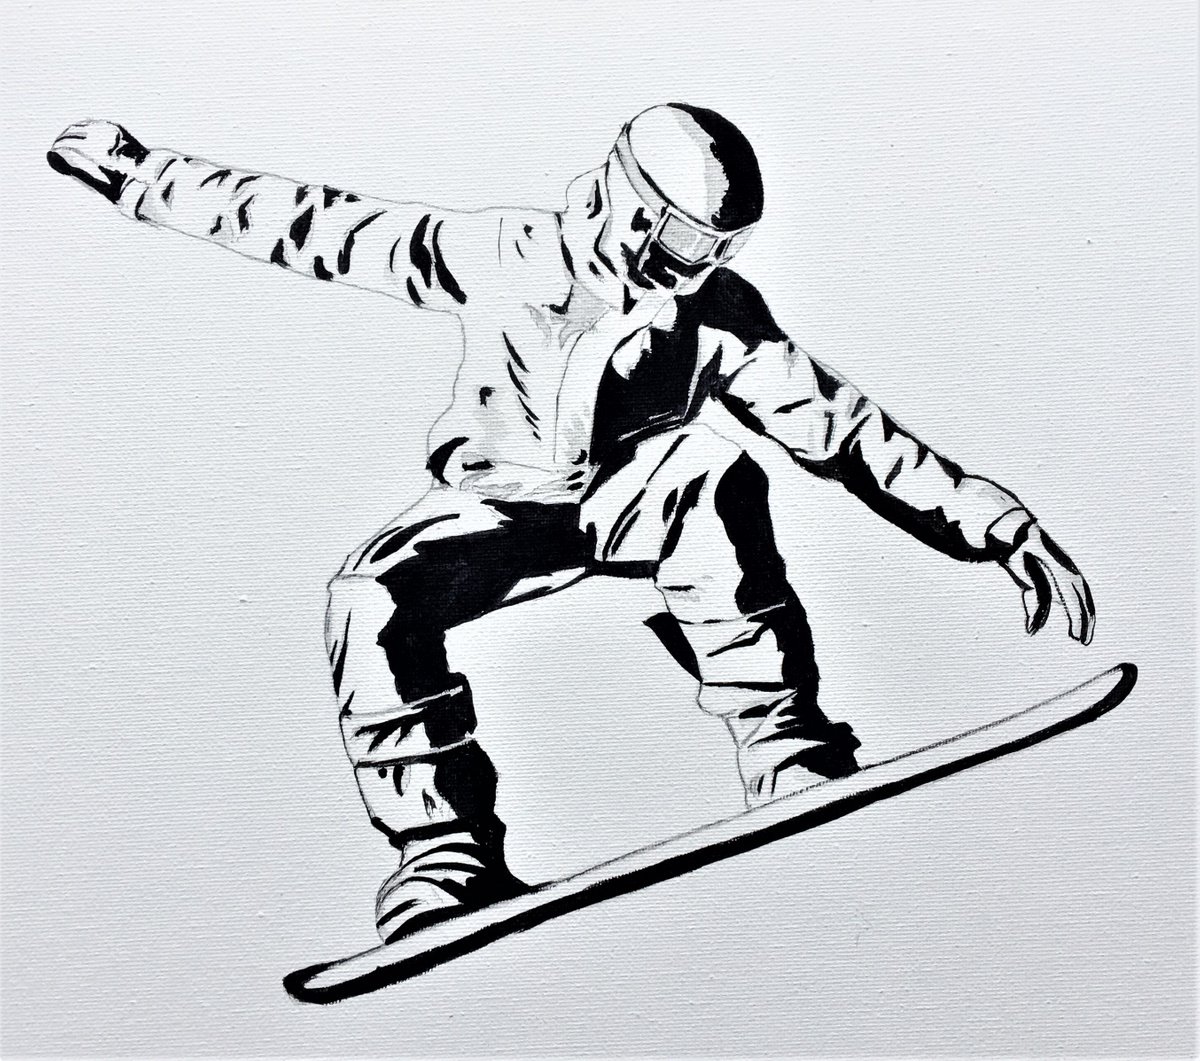 Snowboarder #1 by Laurence Wheeler